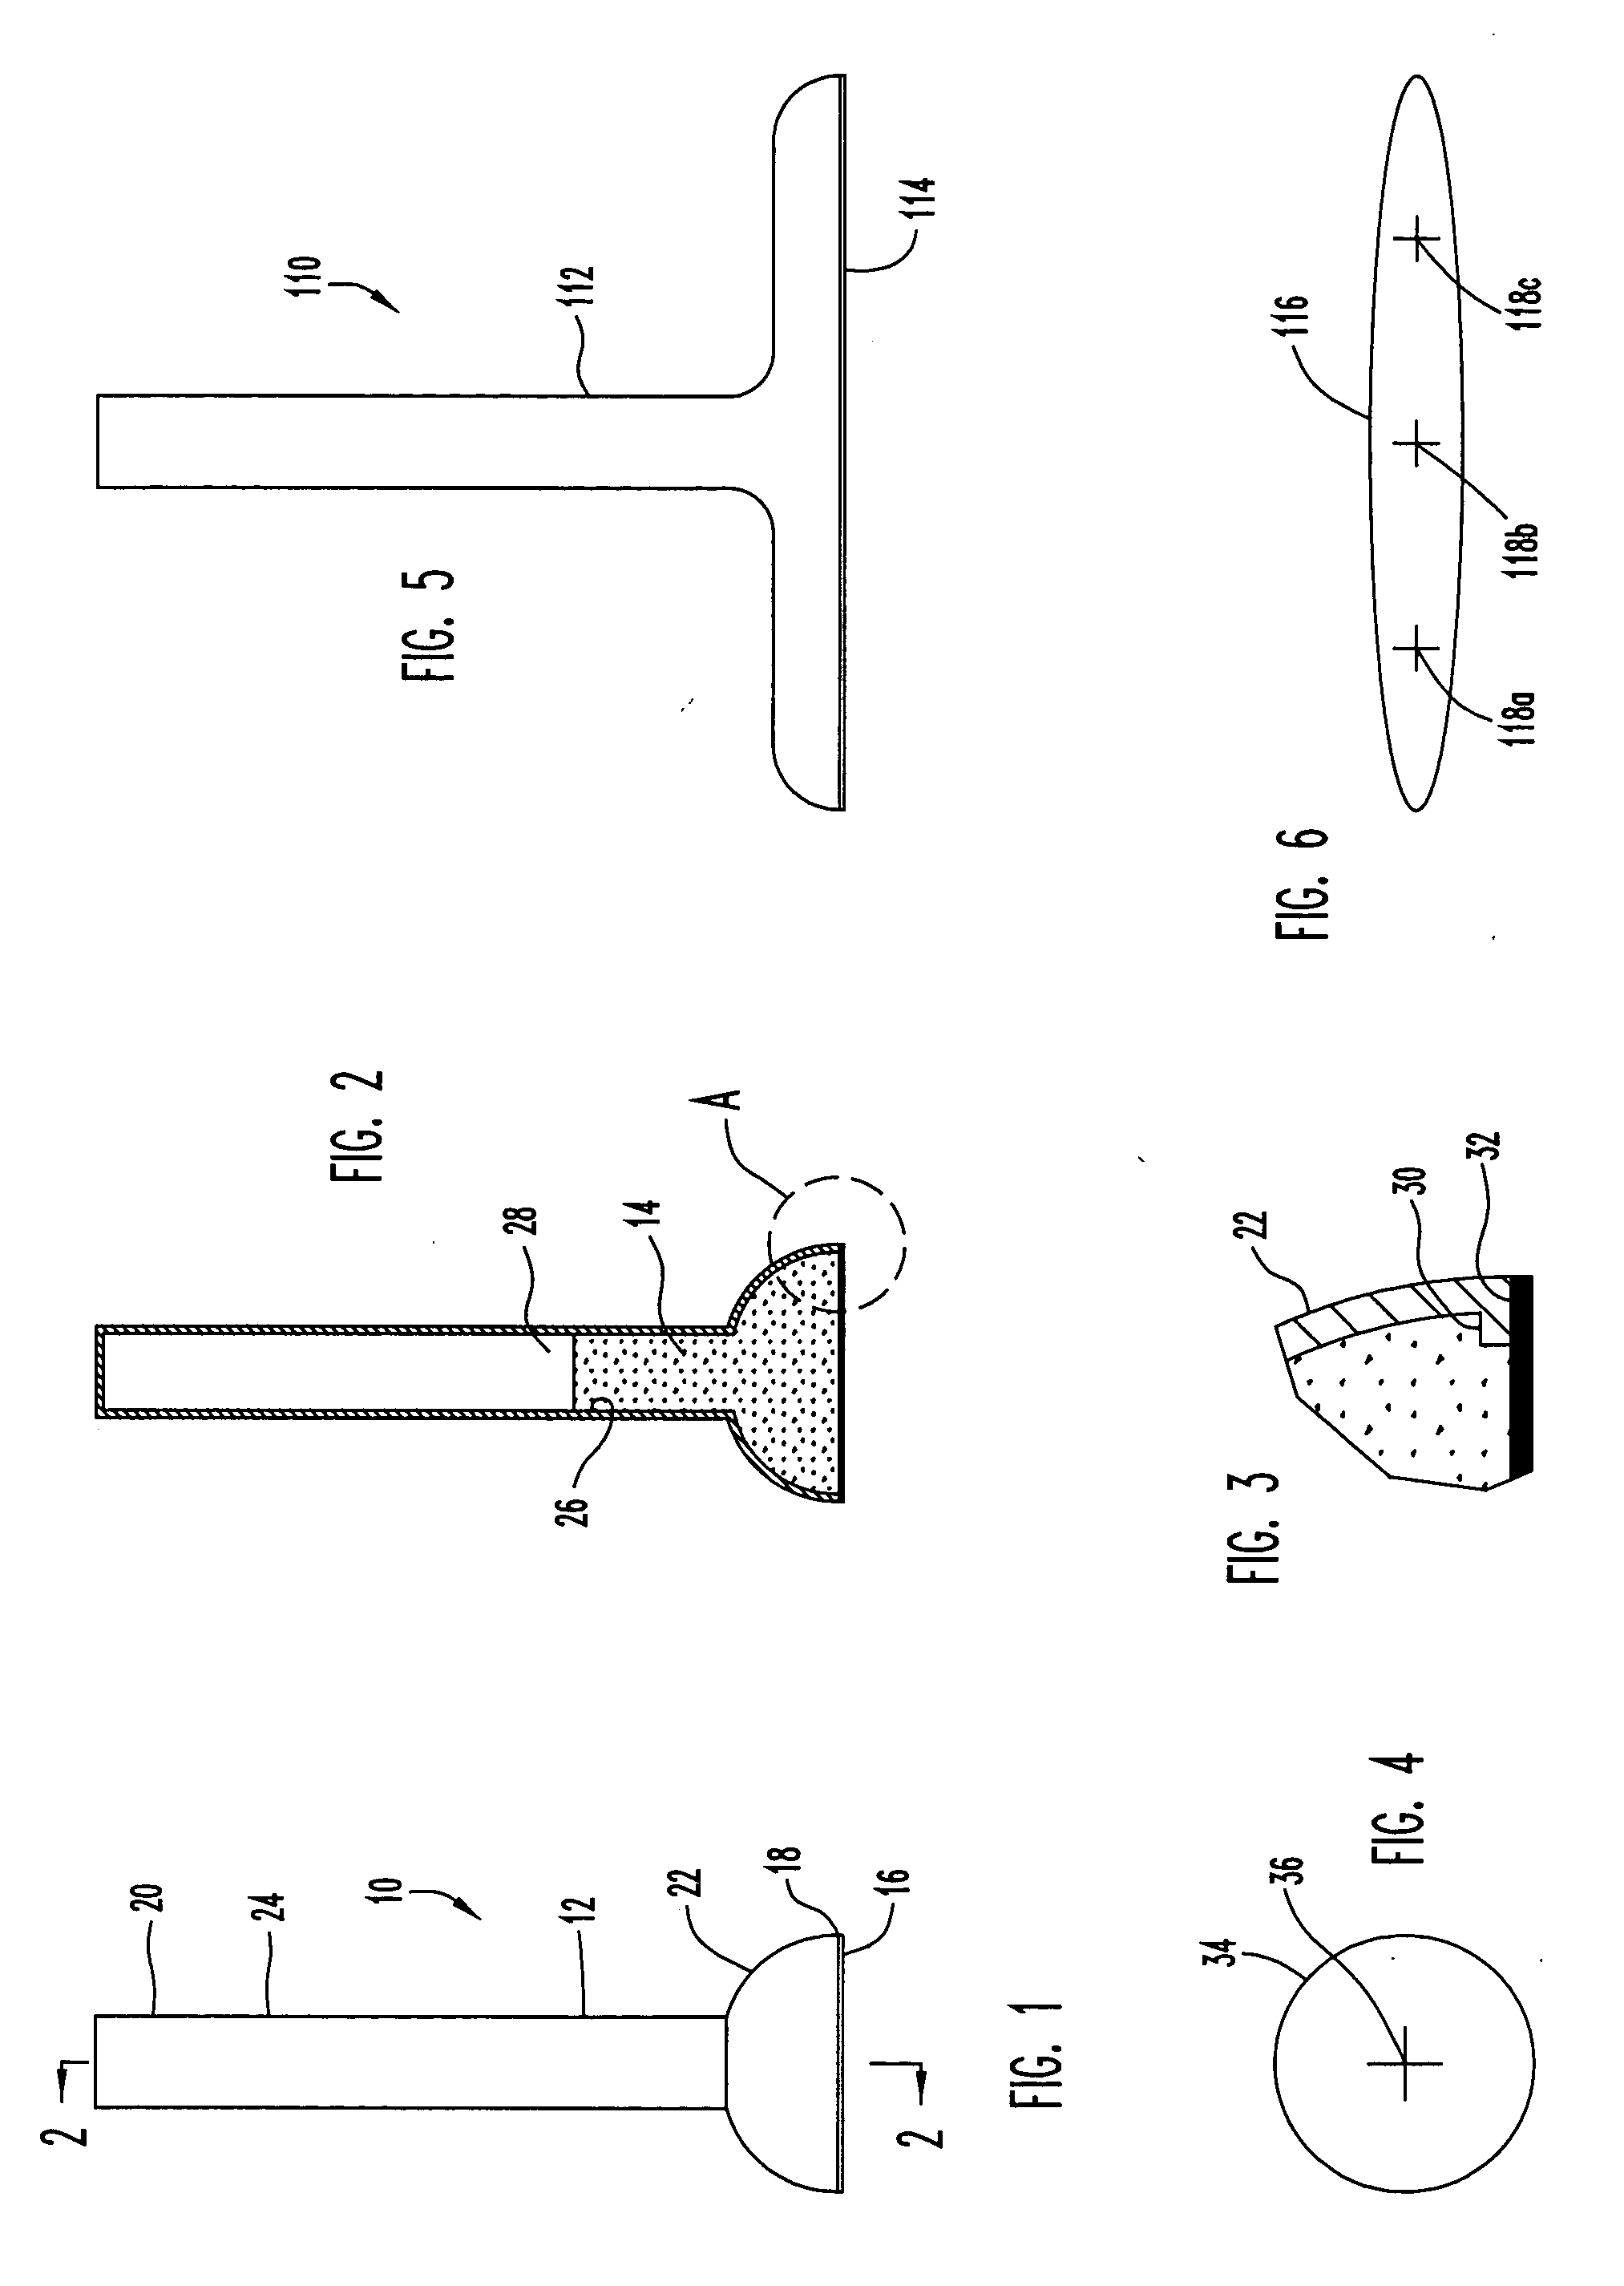 Ice pain management device and method